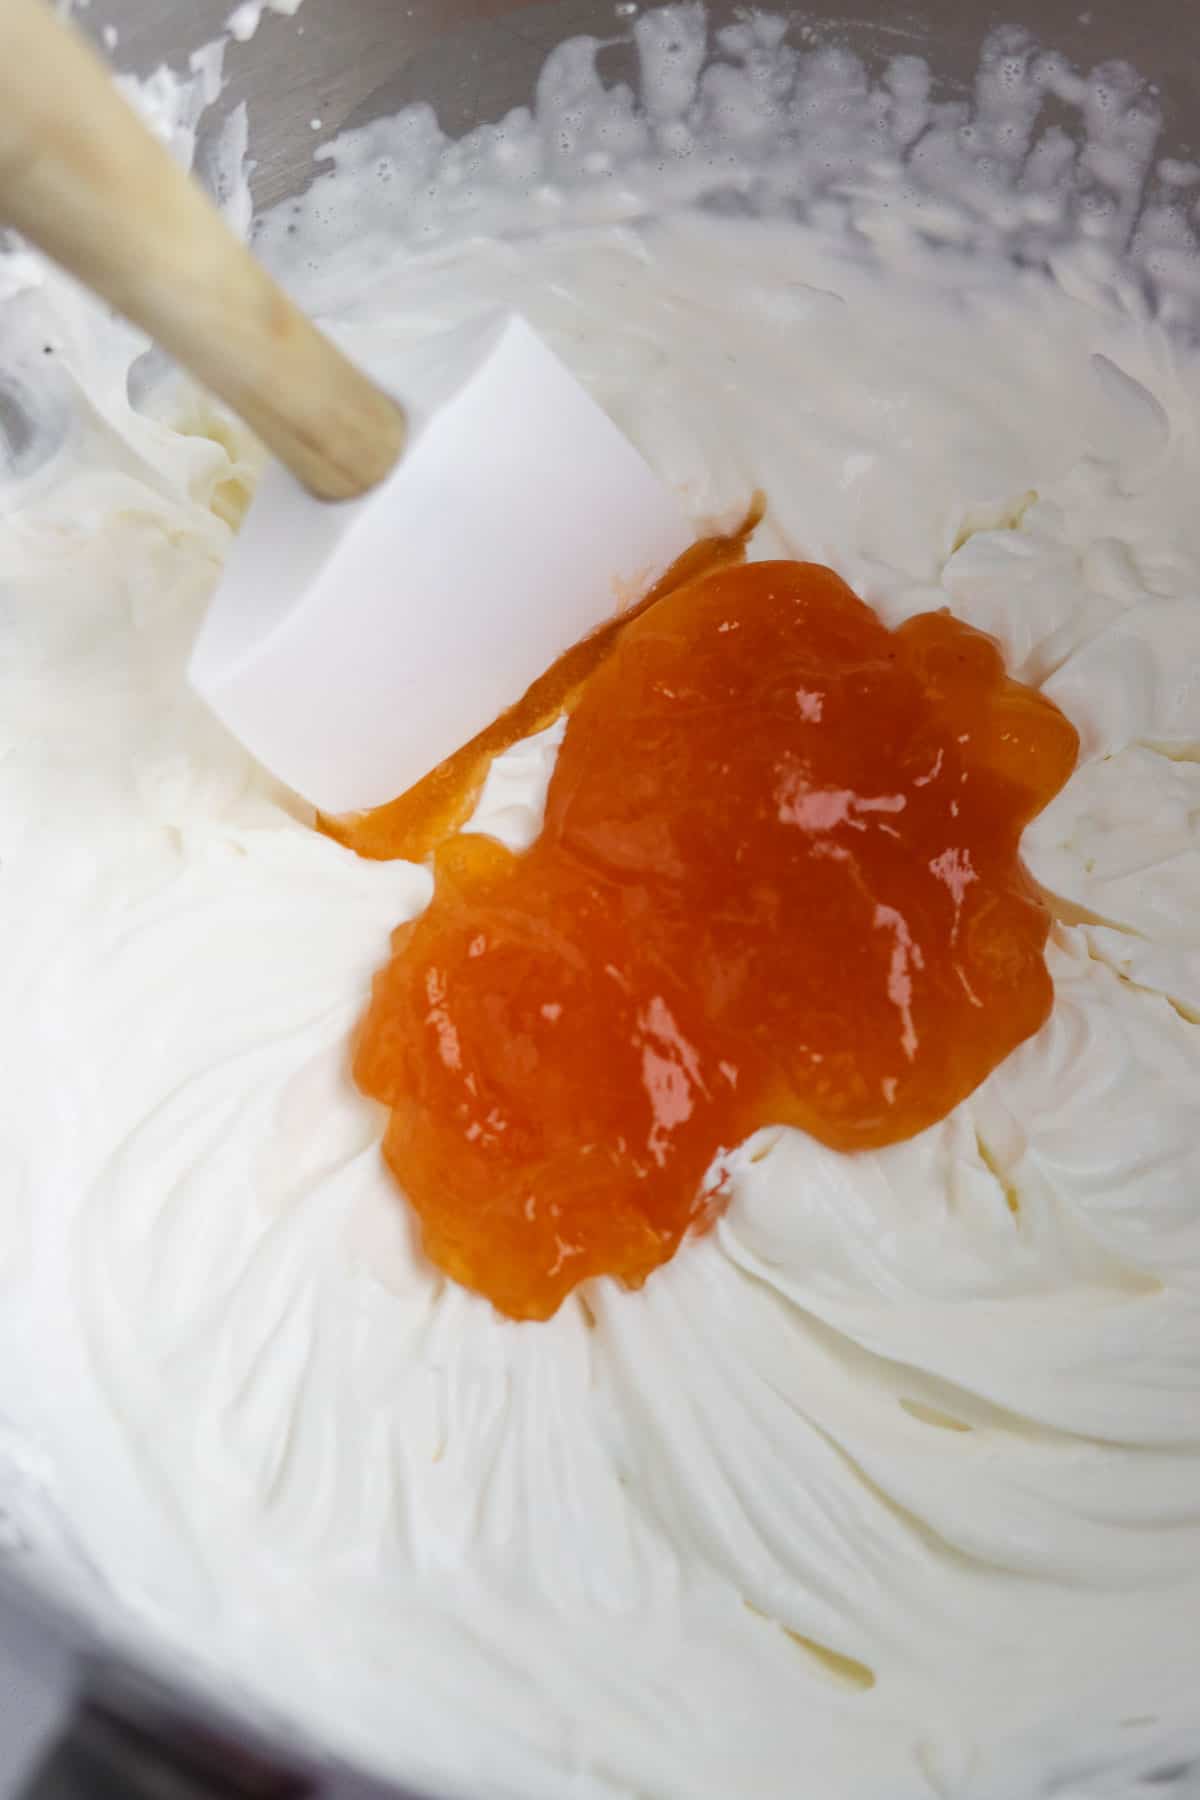 Cloudberry preserves on top of whipped cream in a metal bowl with a rubber spatula.